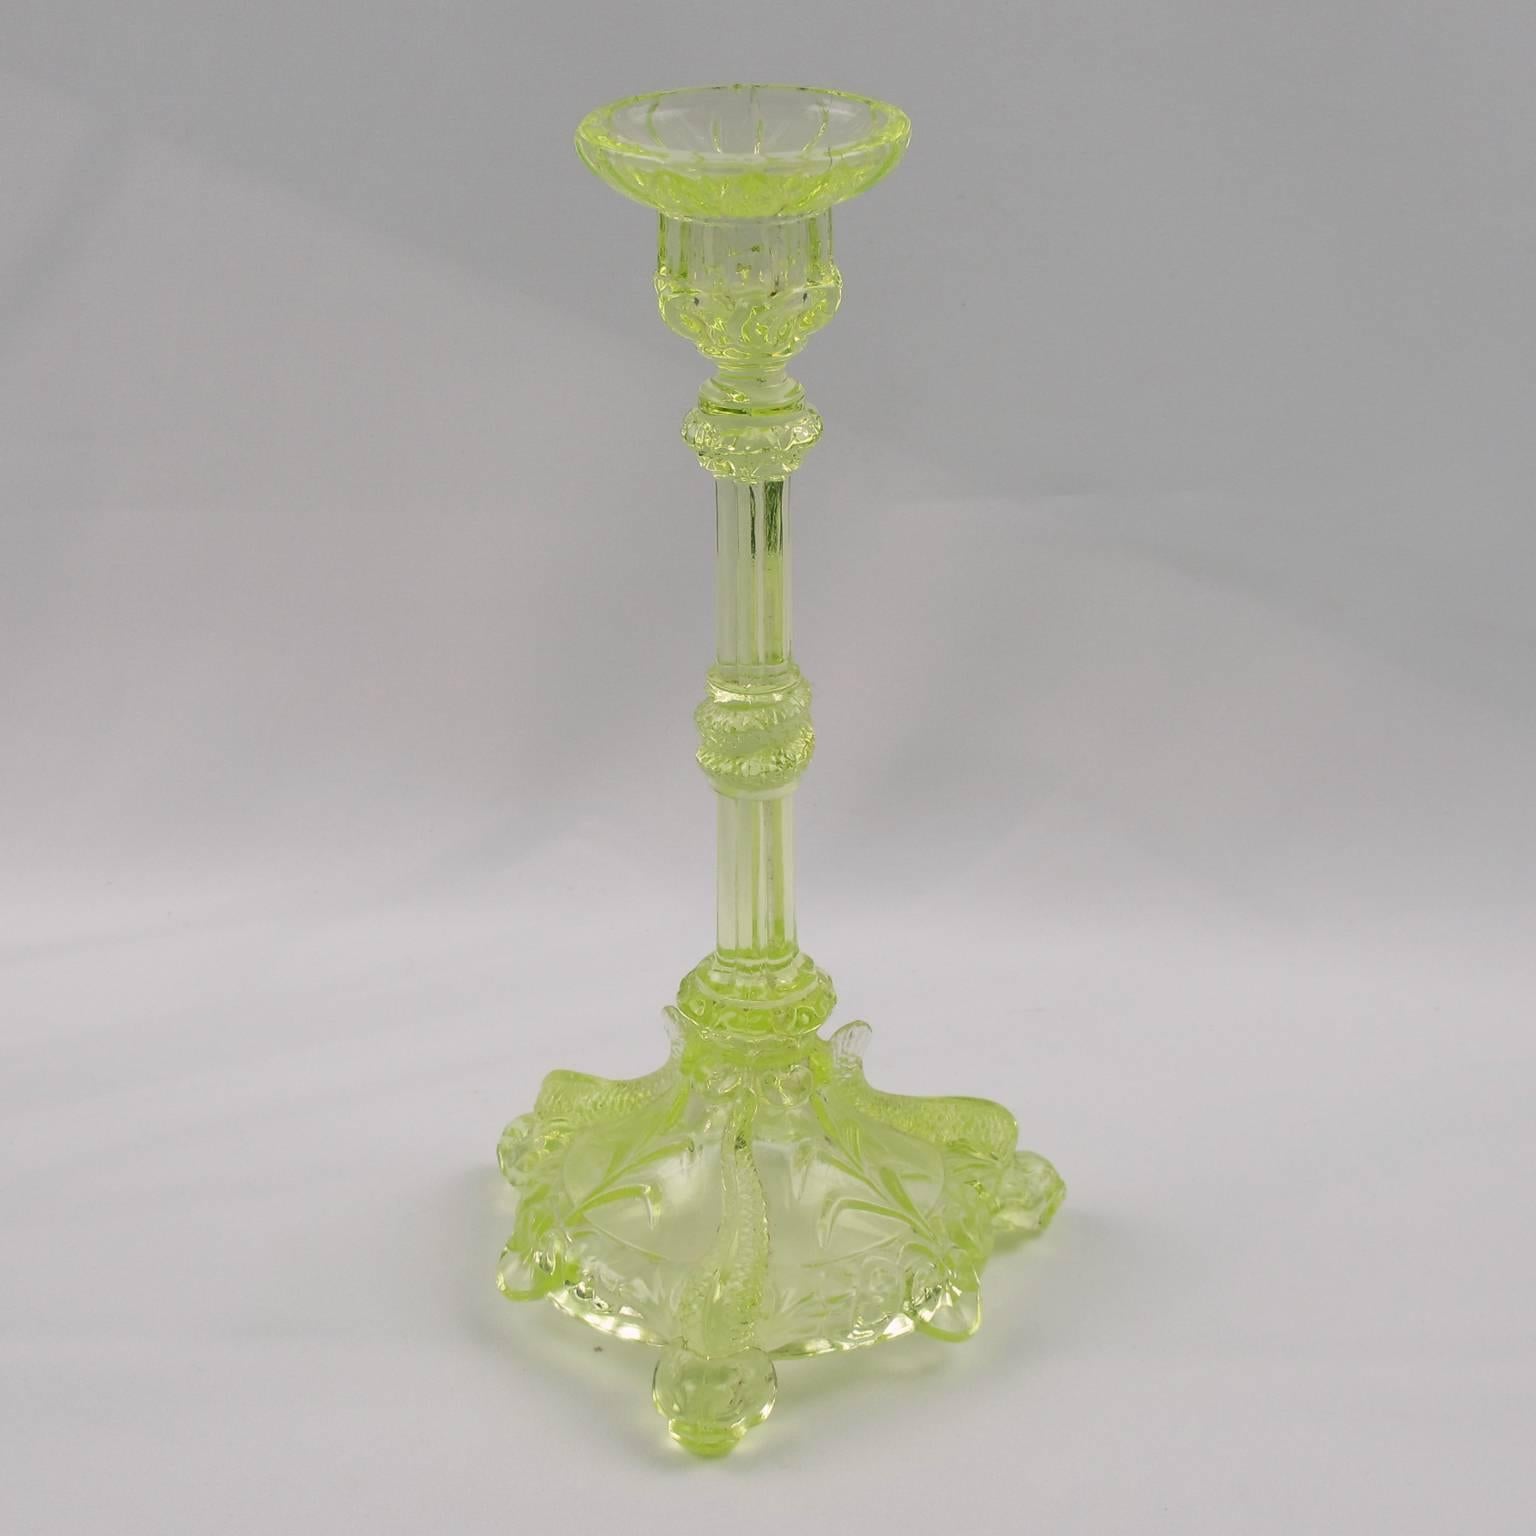 Charming French Vaseline uranium (also called Ouraline) pressed crystal candlestick, candleholder, by Cristallerie Portieux, France. Elegant shape with lots of details in the molding design, unusual three feet featuring huge fish, coiled snake on